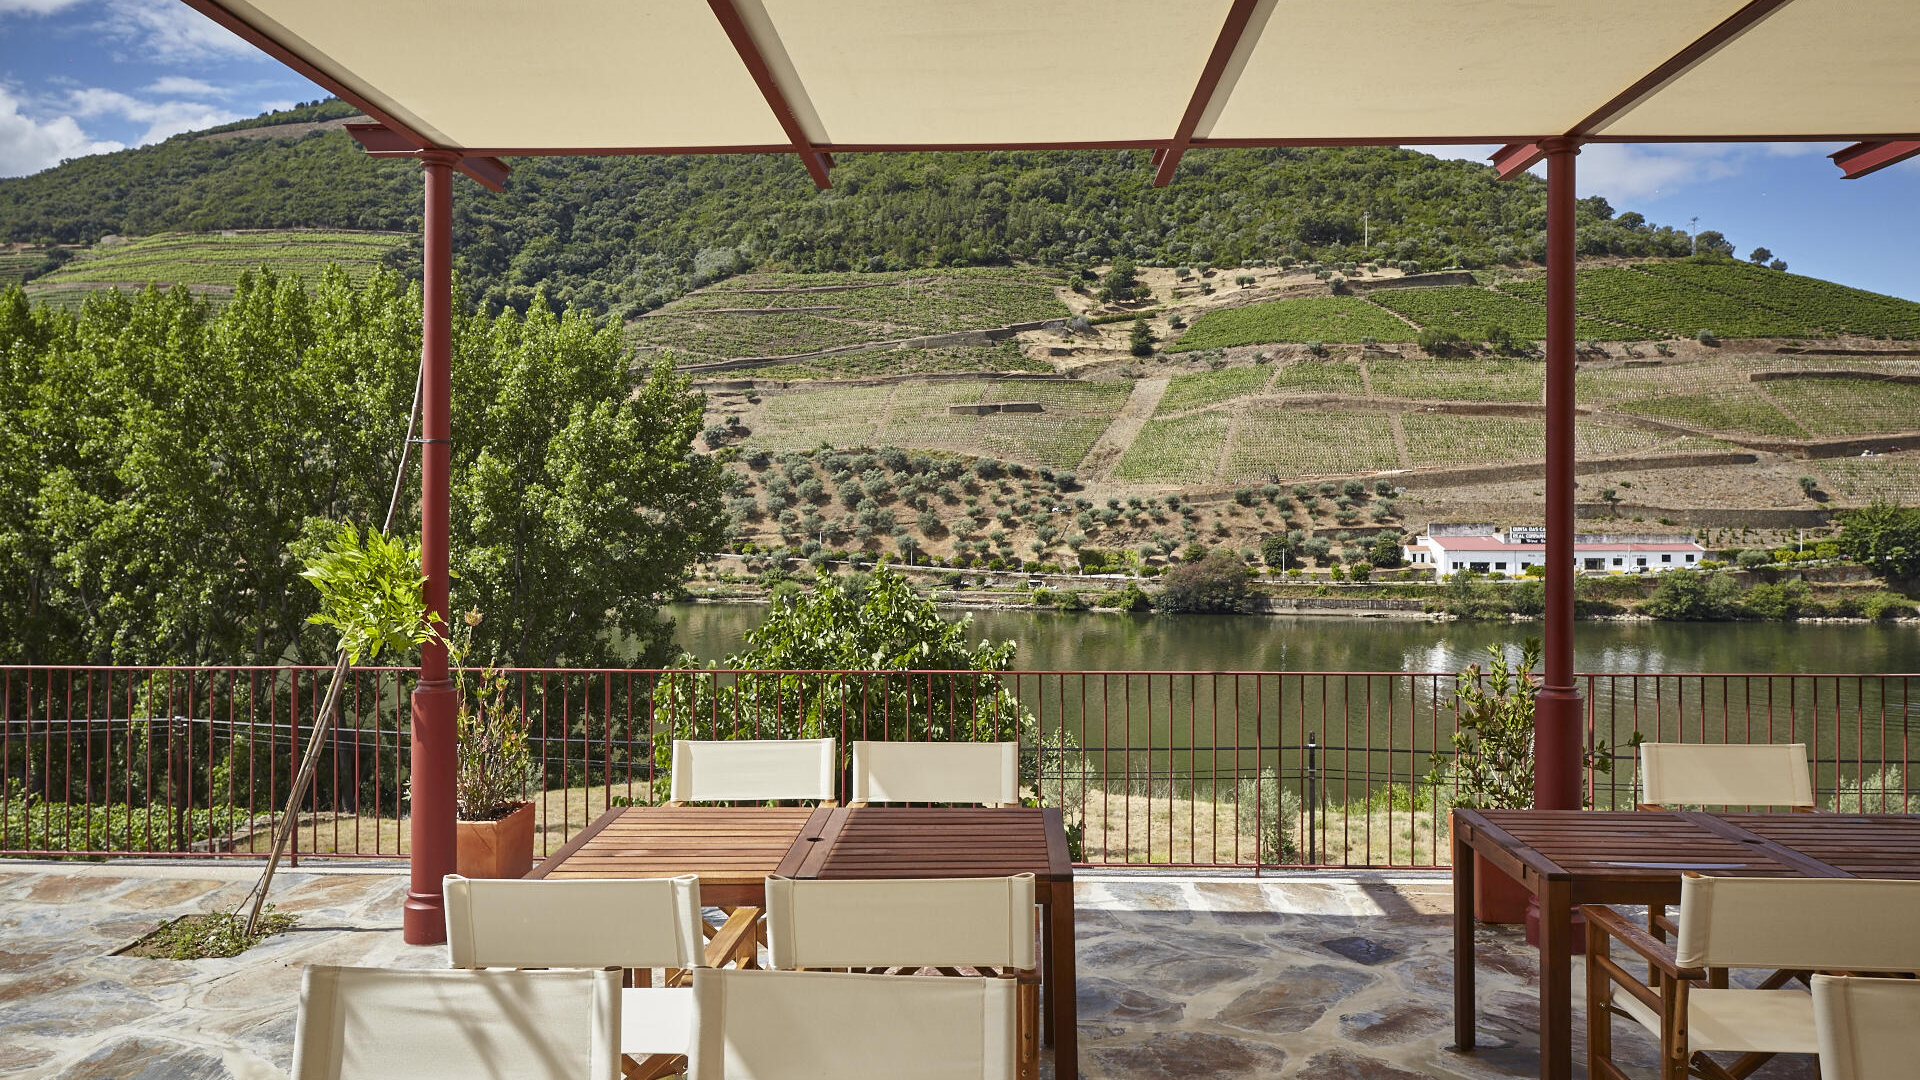 10 Top-Rated Wineries in Douro Portugal, Quinta do Bomfim 